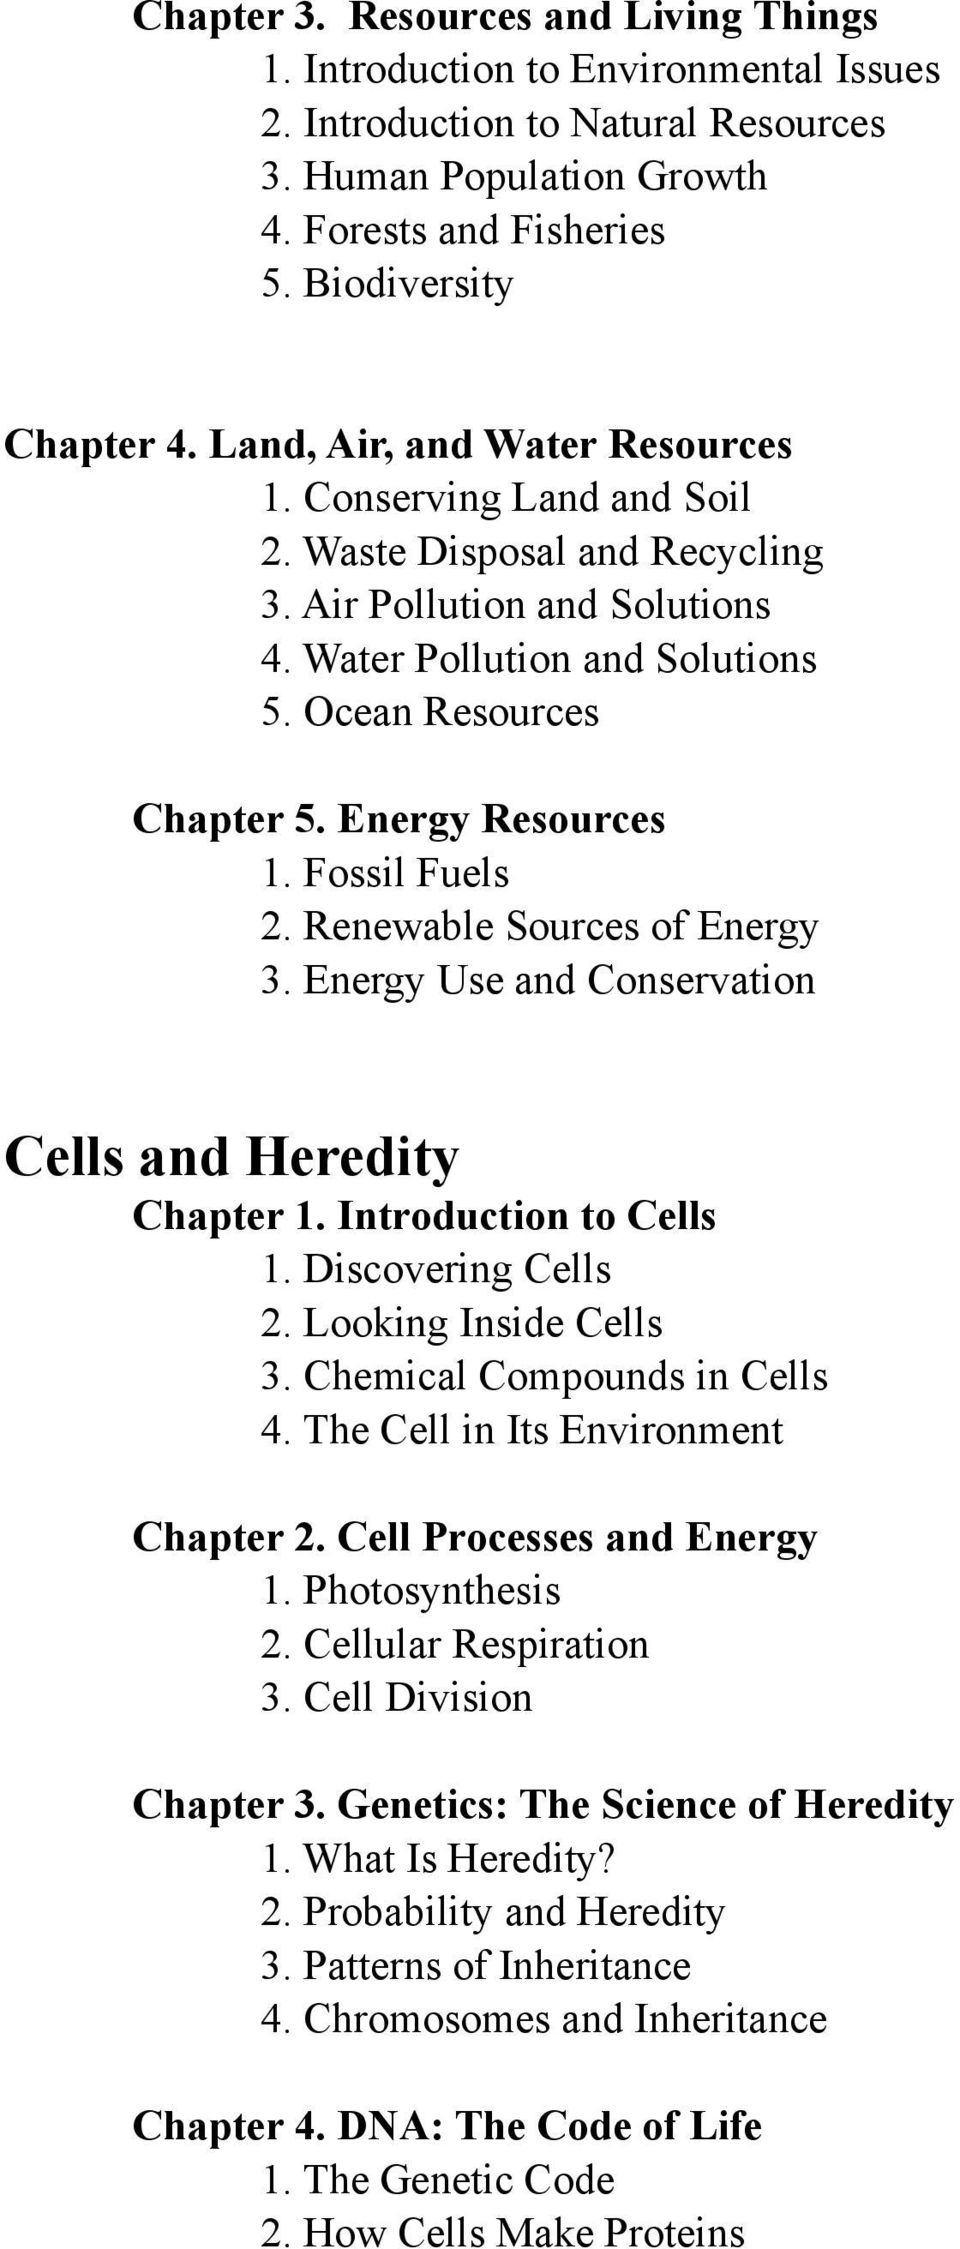 Energy Resources 1. Fossil Fuels 2. Renewable Sources of Energy 3. Energy Use and Conservation Cells and Heredity Chapter 1. Introduction to Cells 1. Discovering Cells 2. Looking Inside Cells 3.